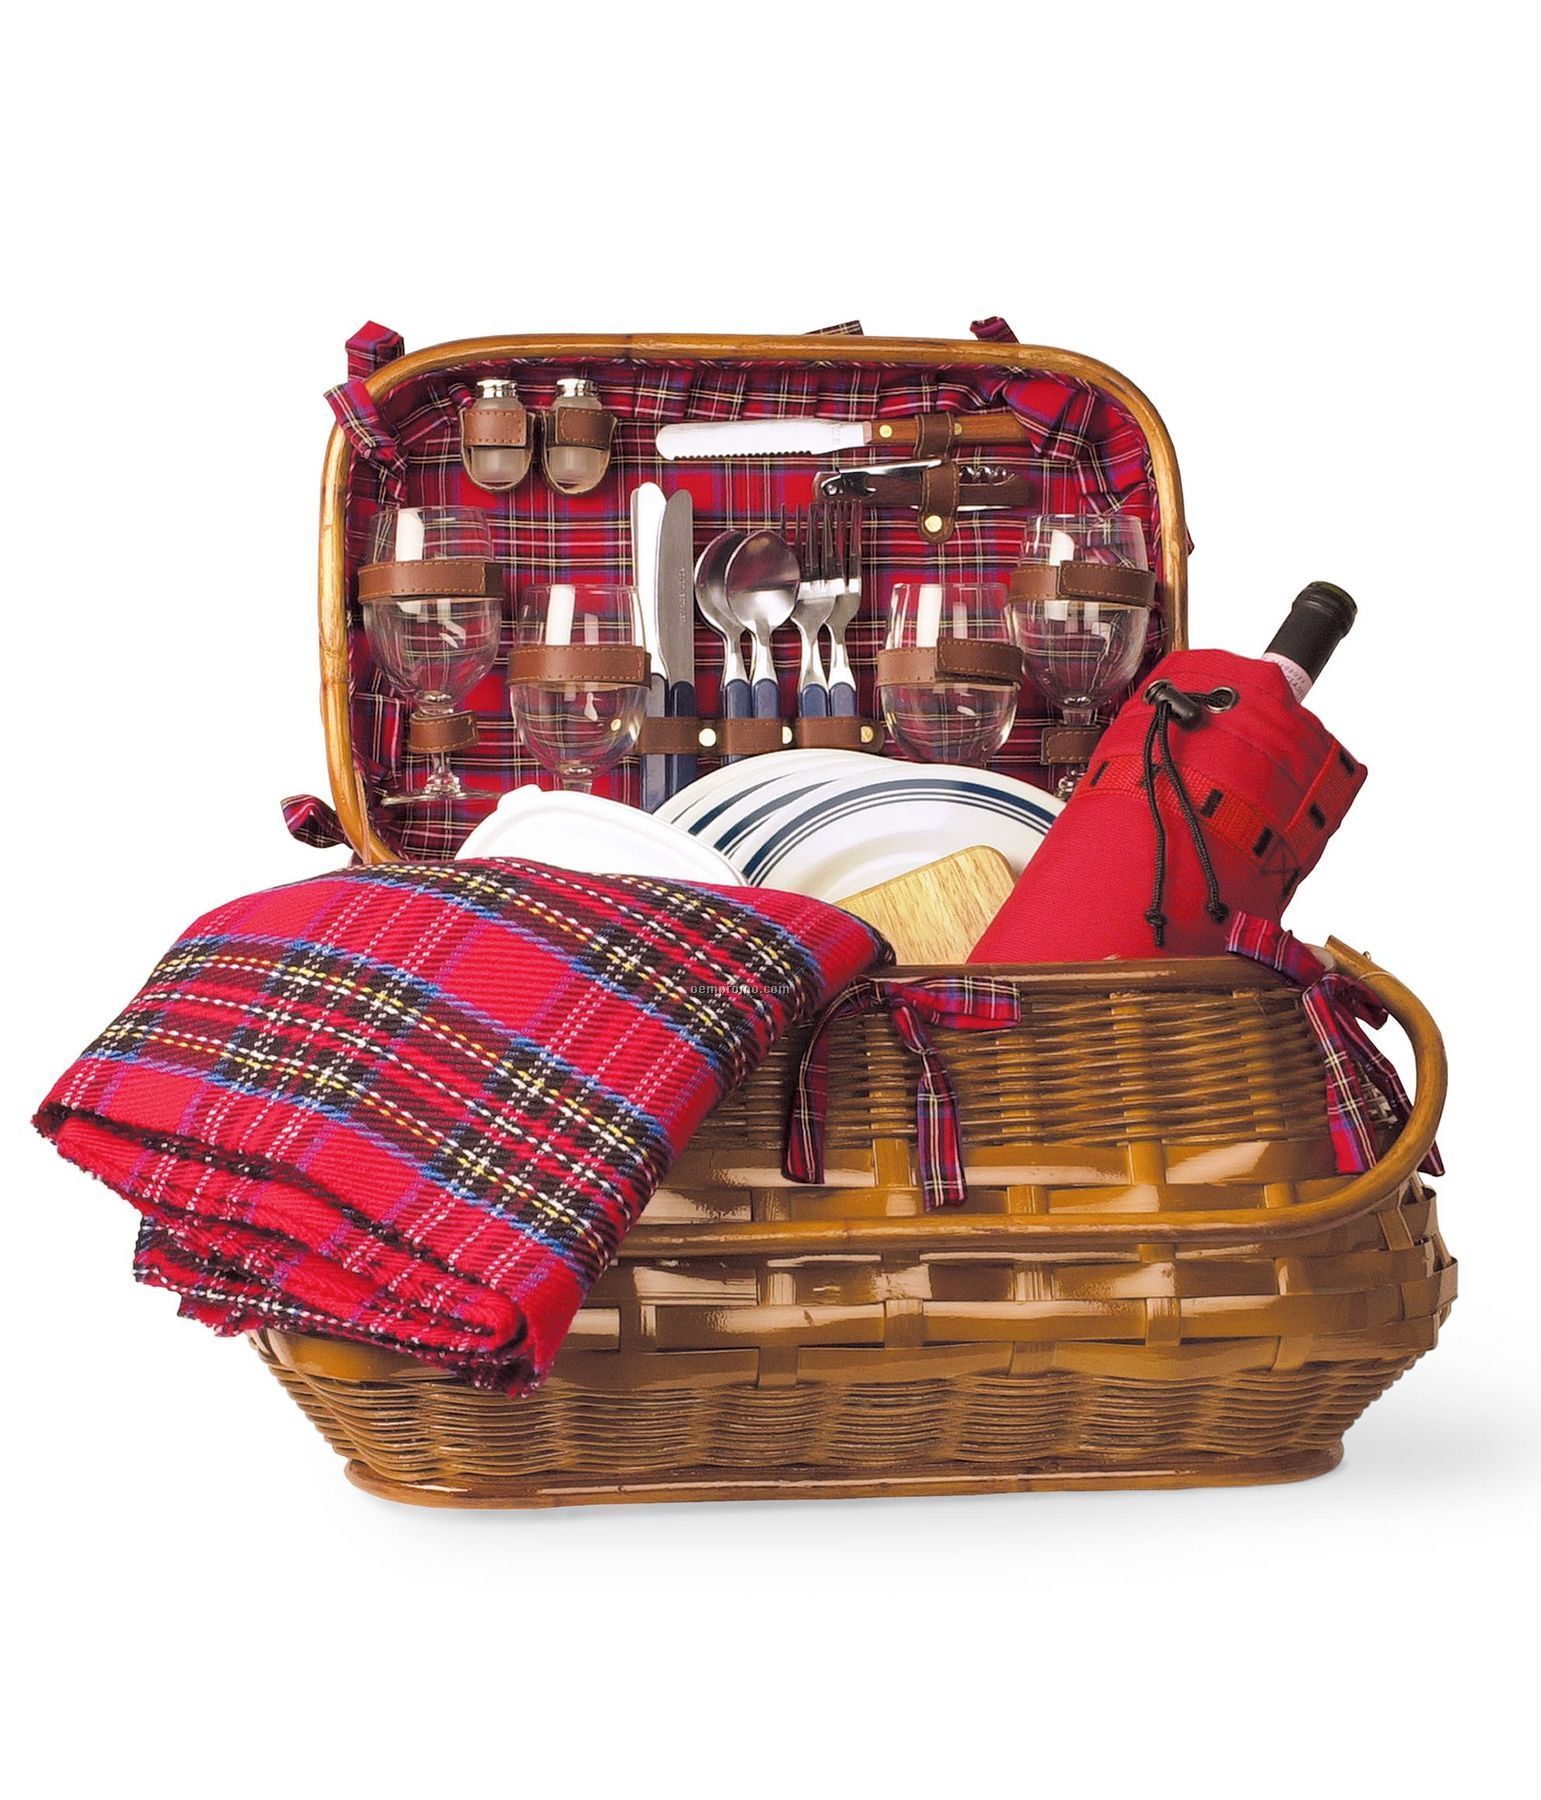 Highlander 21" Bombay Picnic Basket W/ Service For 4 (Red Plaid Accents)